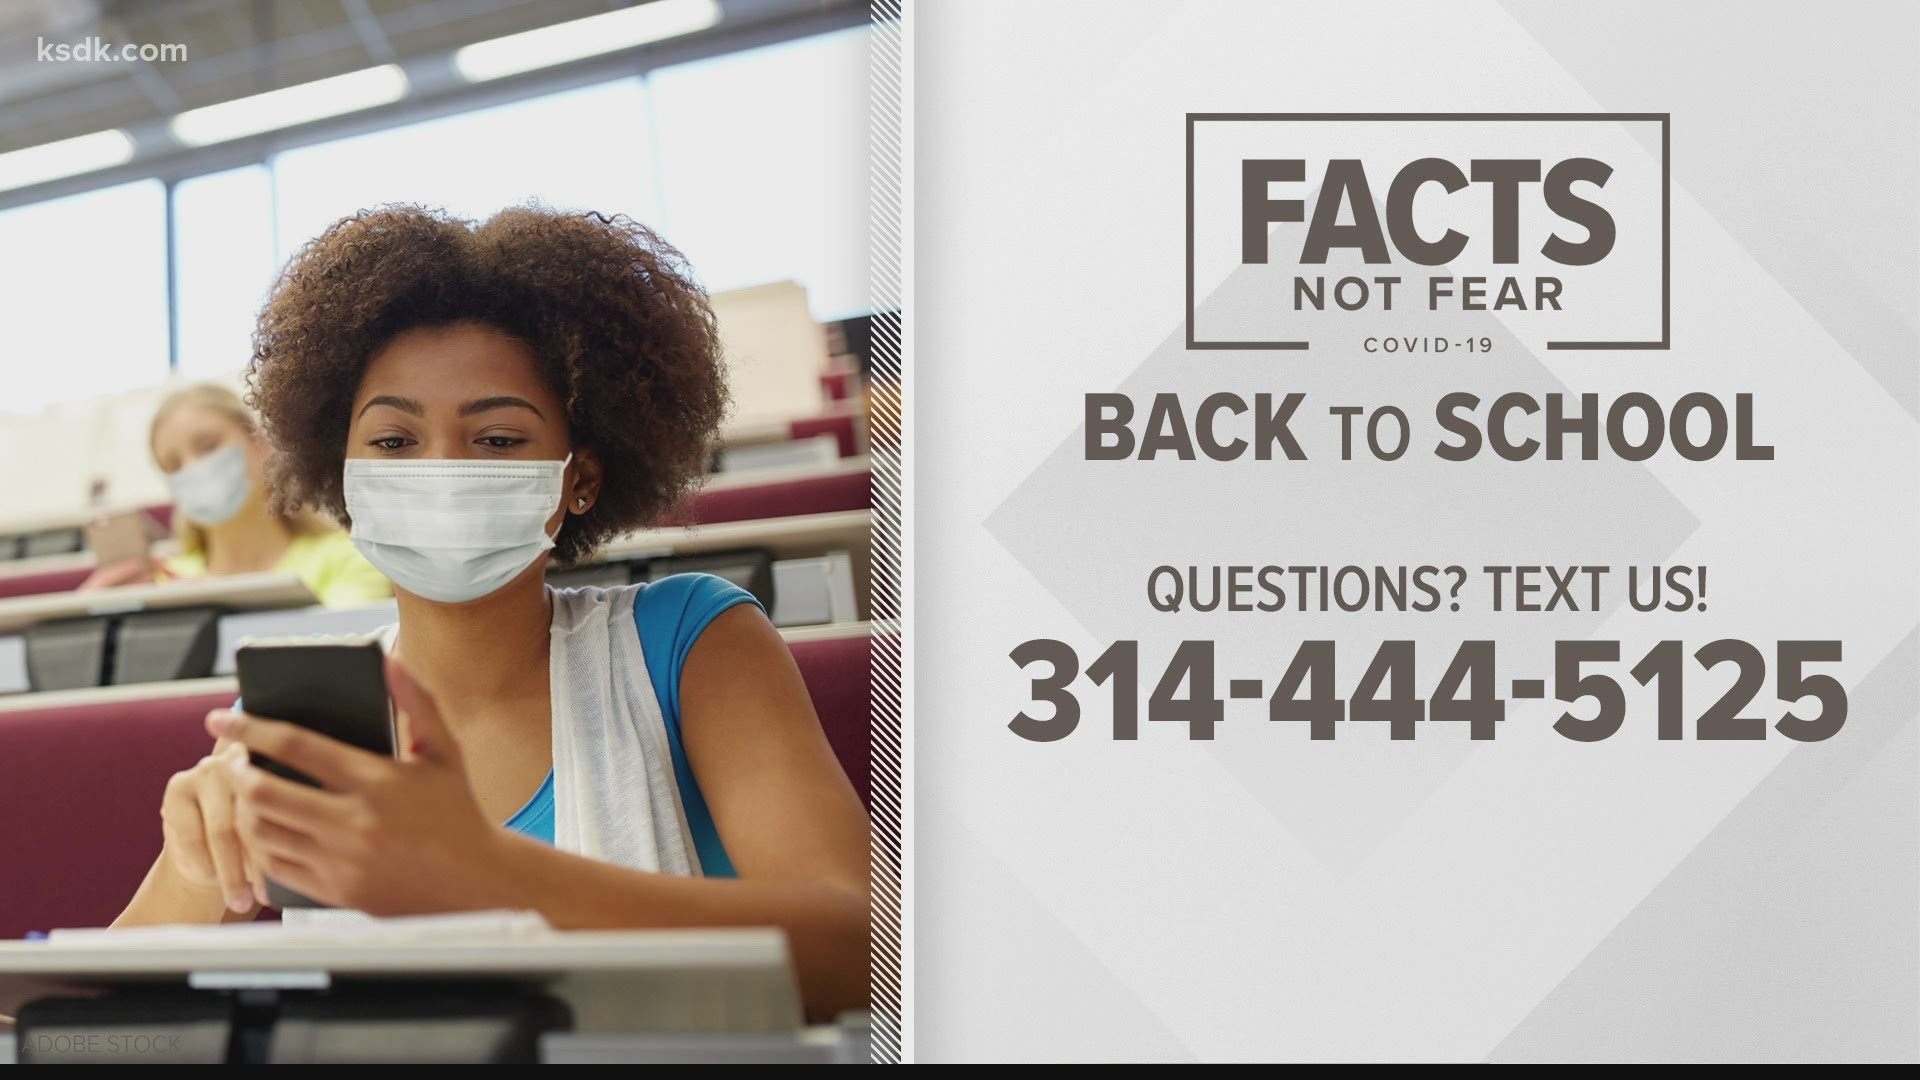 5 On Your Side is focusing on giving you facts and not spreading fear. If you have a question about school reopening plans, text us at 314-444-5125